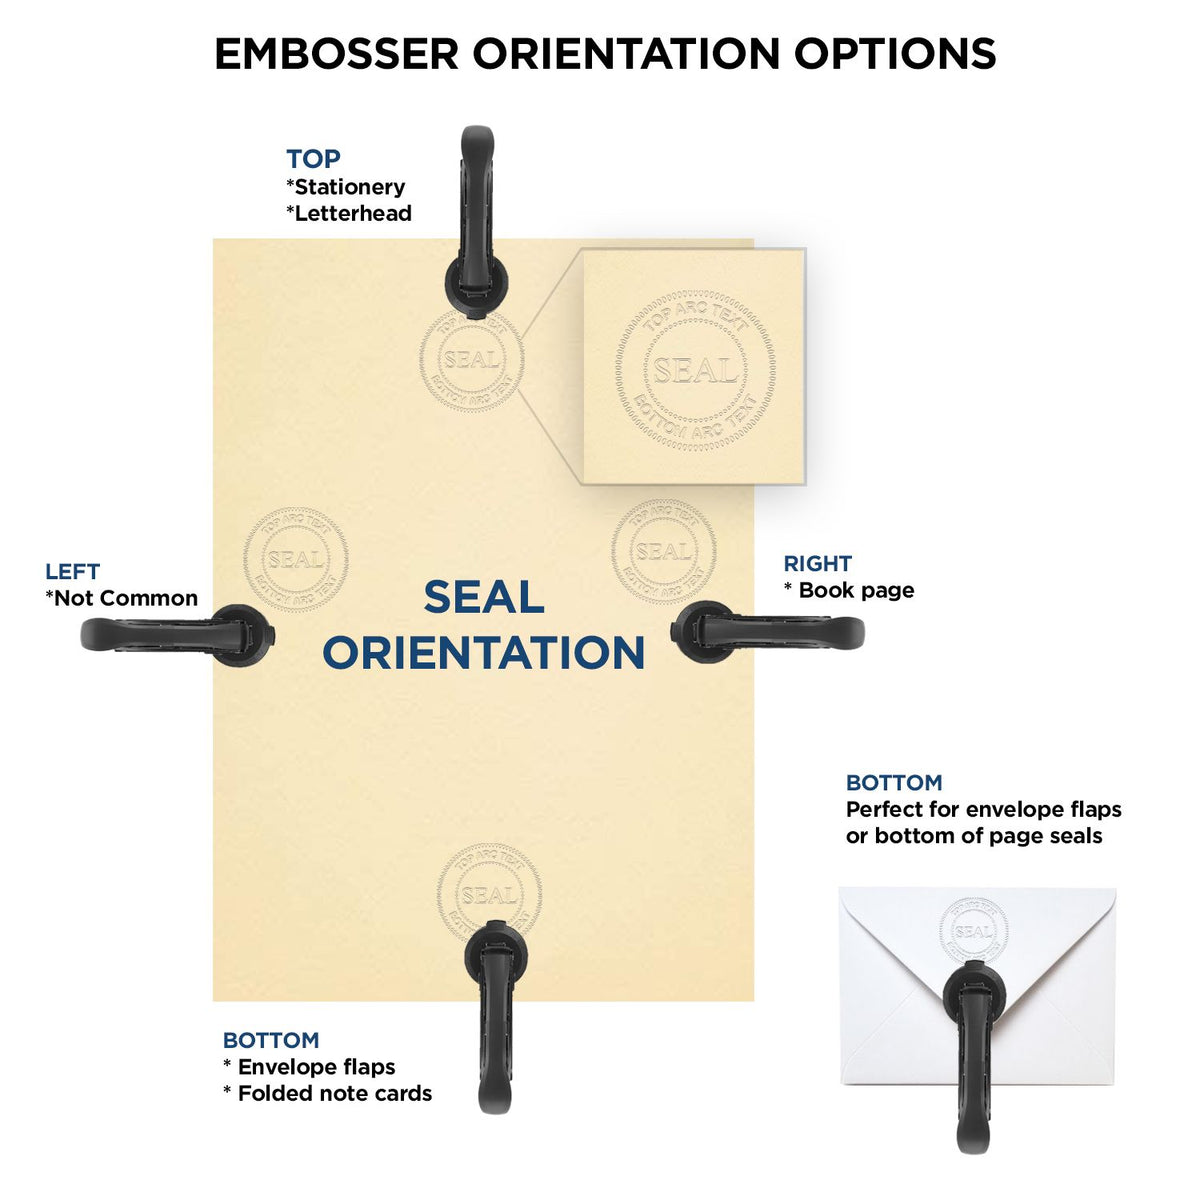 An infographic for the Handheld New Hampshire Architect Seal Embosser showing embosser orientation, this is showing examples of a top, bottom, right and left insert.